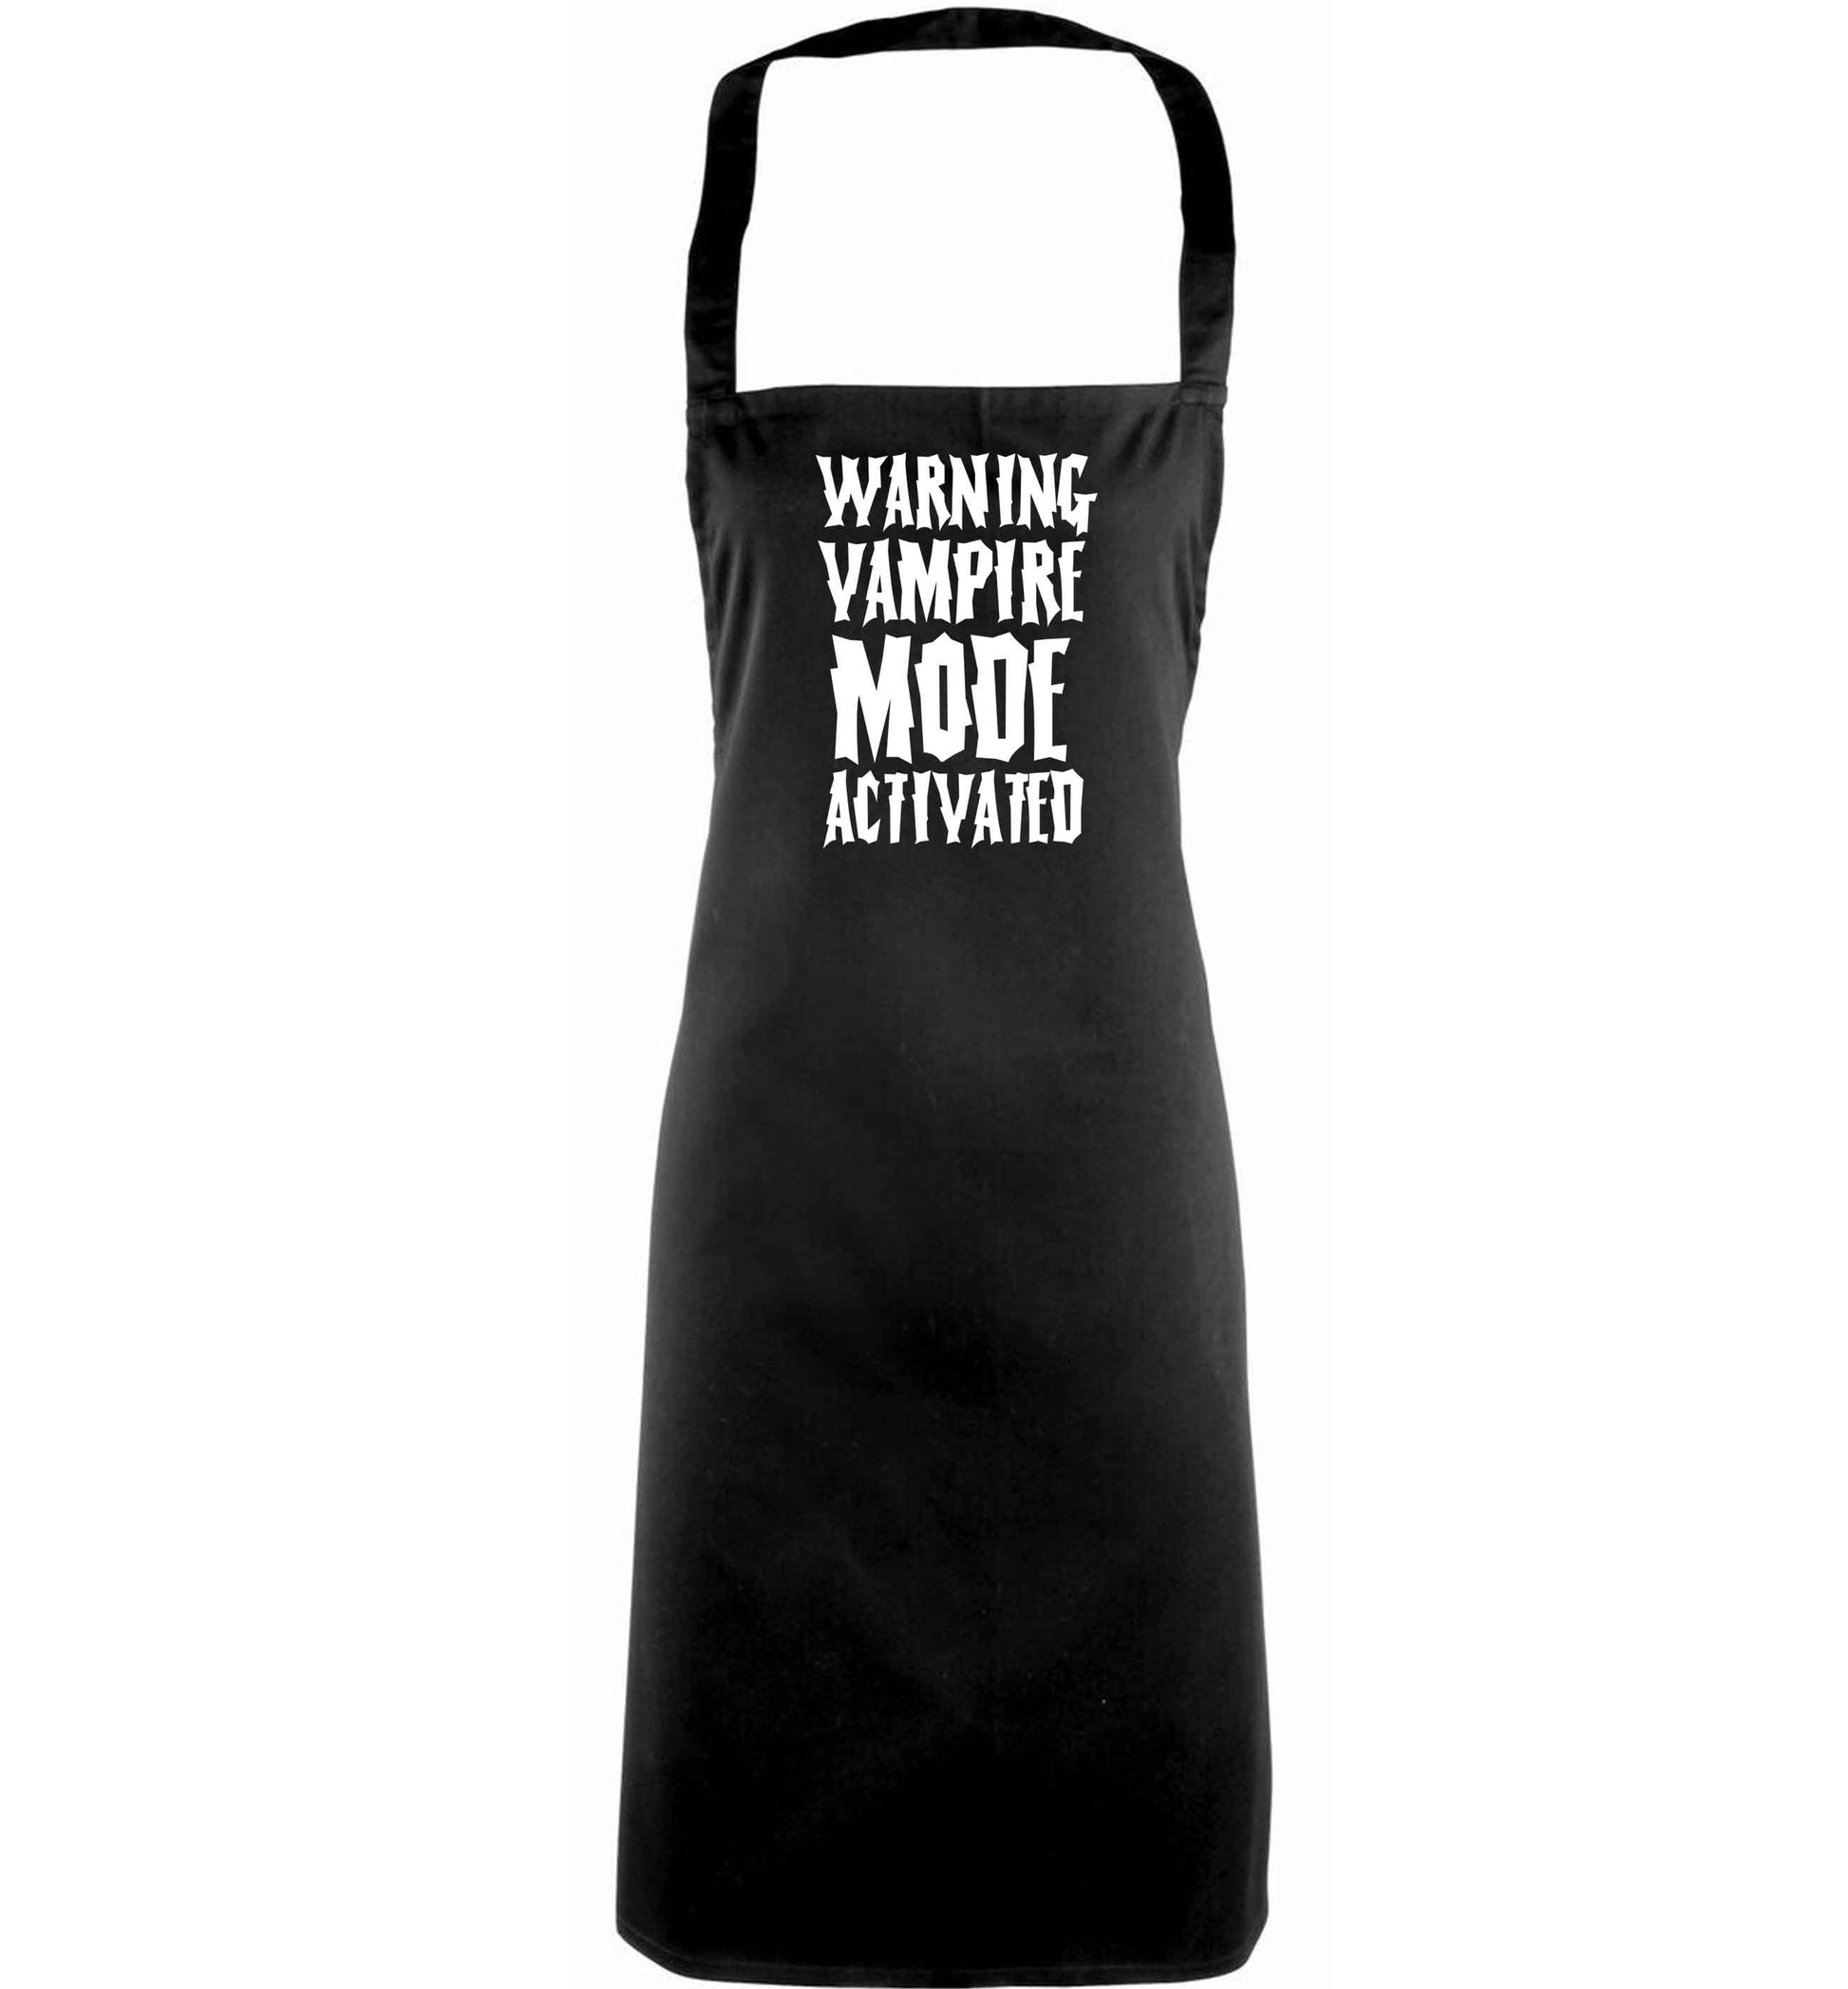 Warning vampire mode activated adults black apron